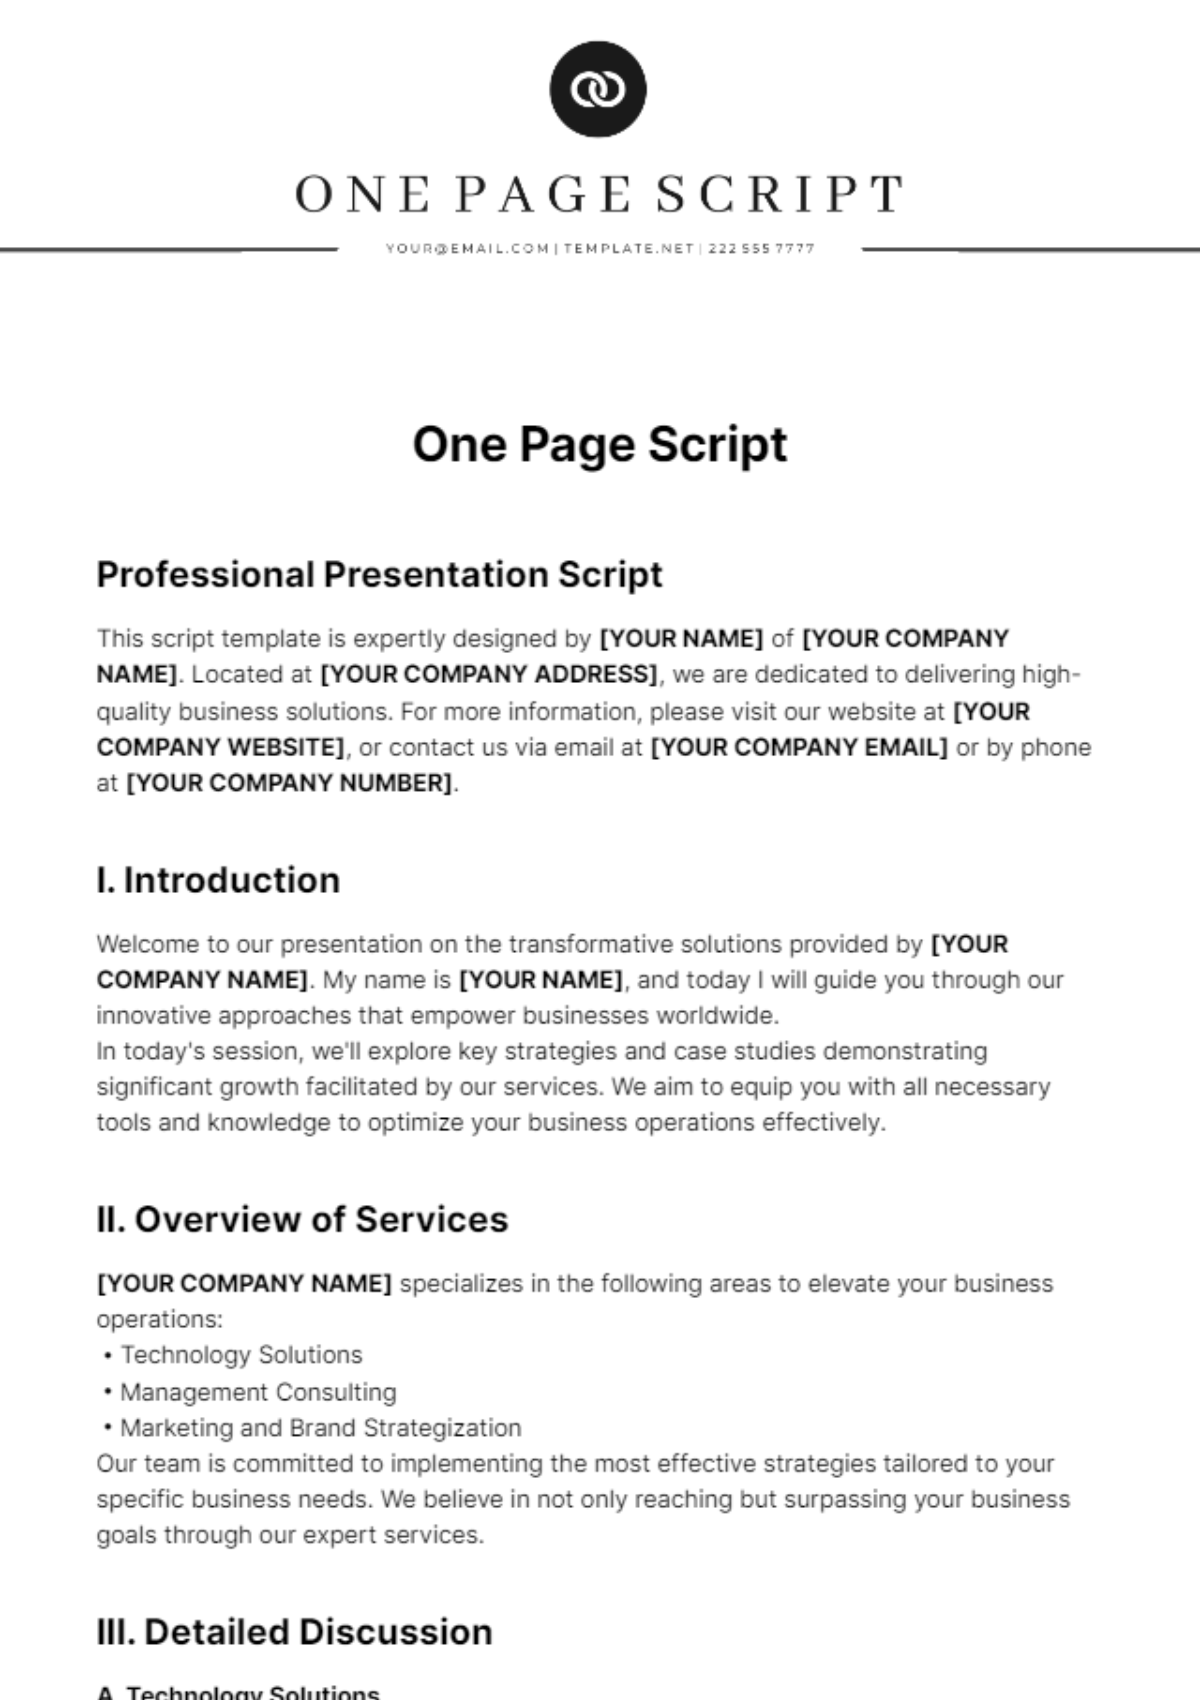 Free One Page Script Template